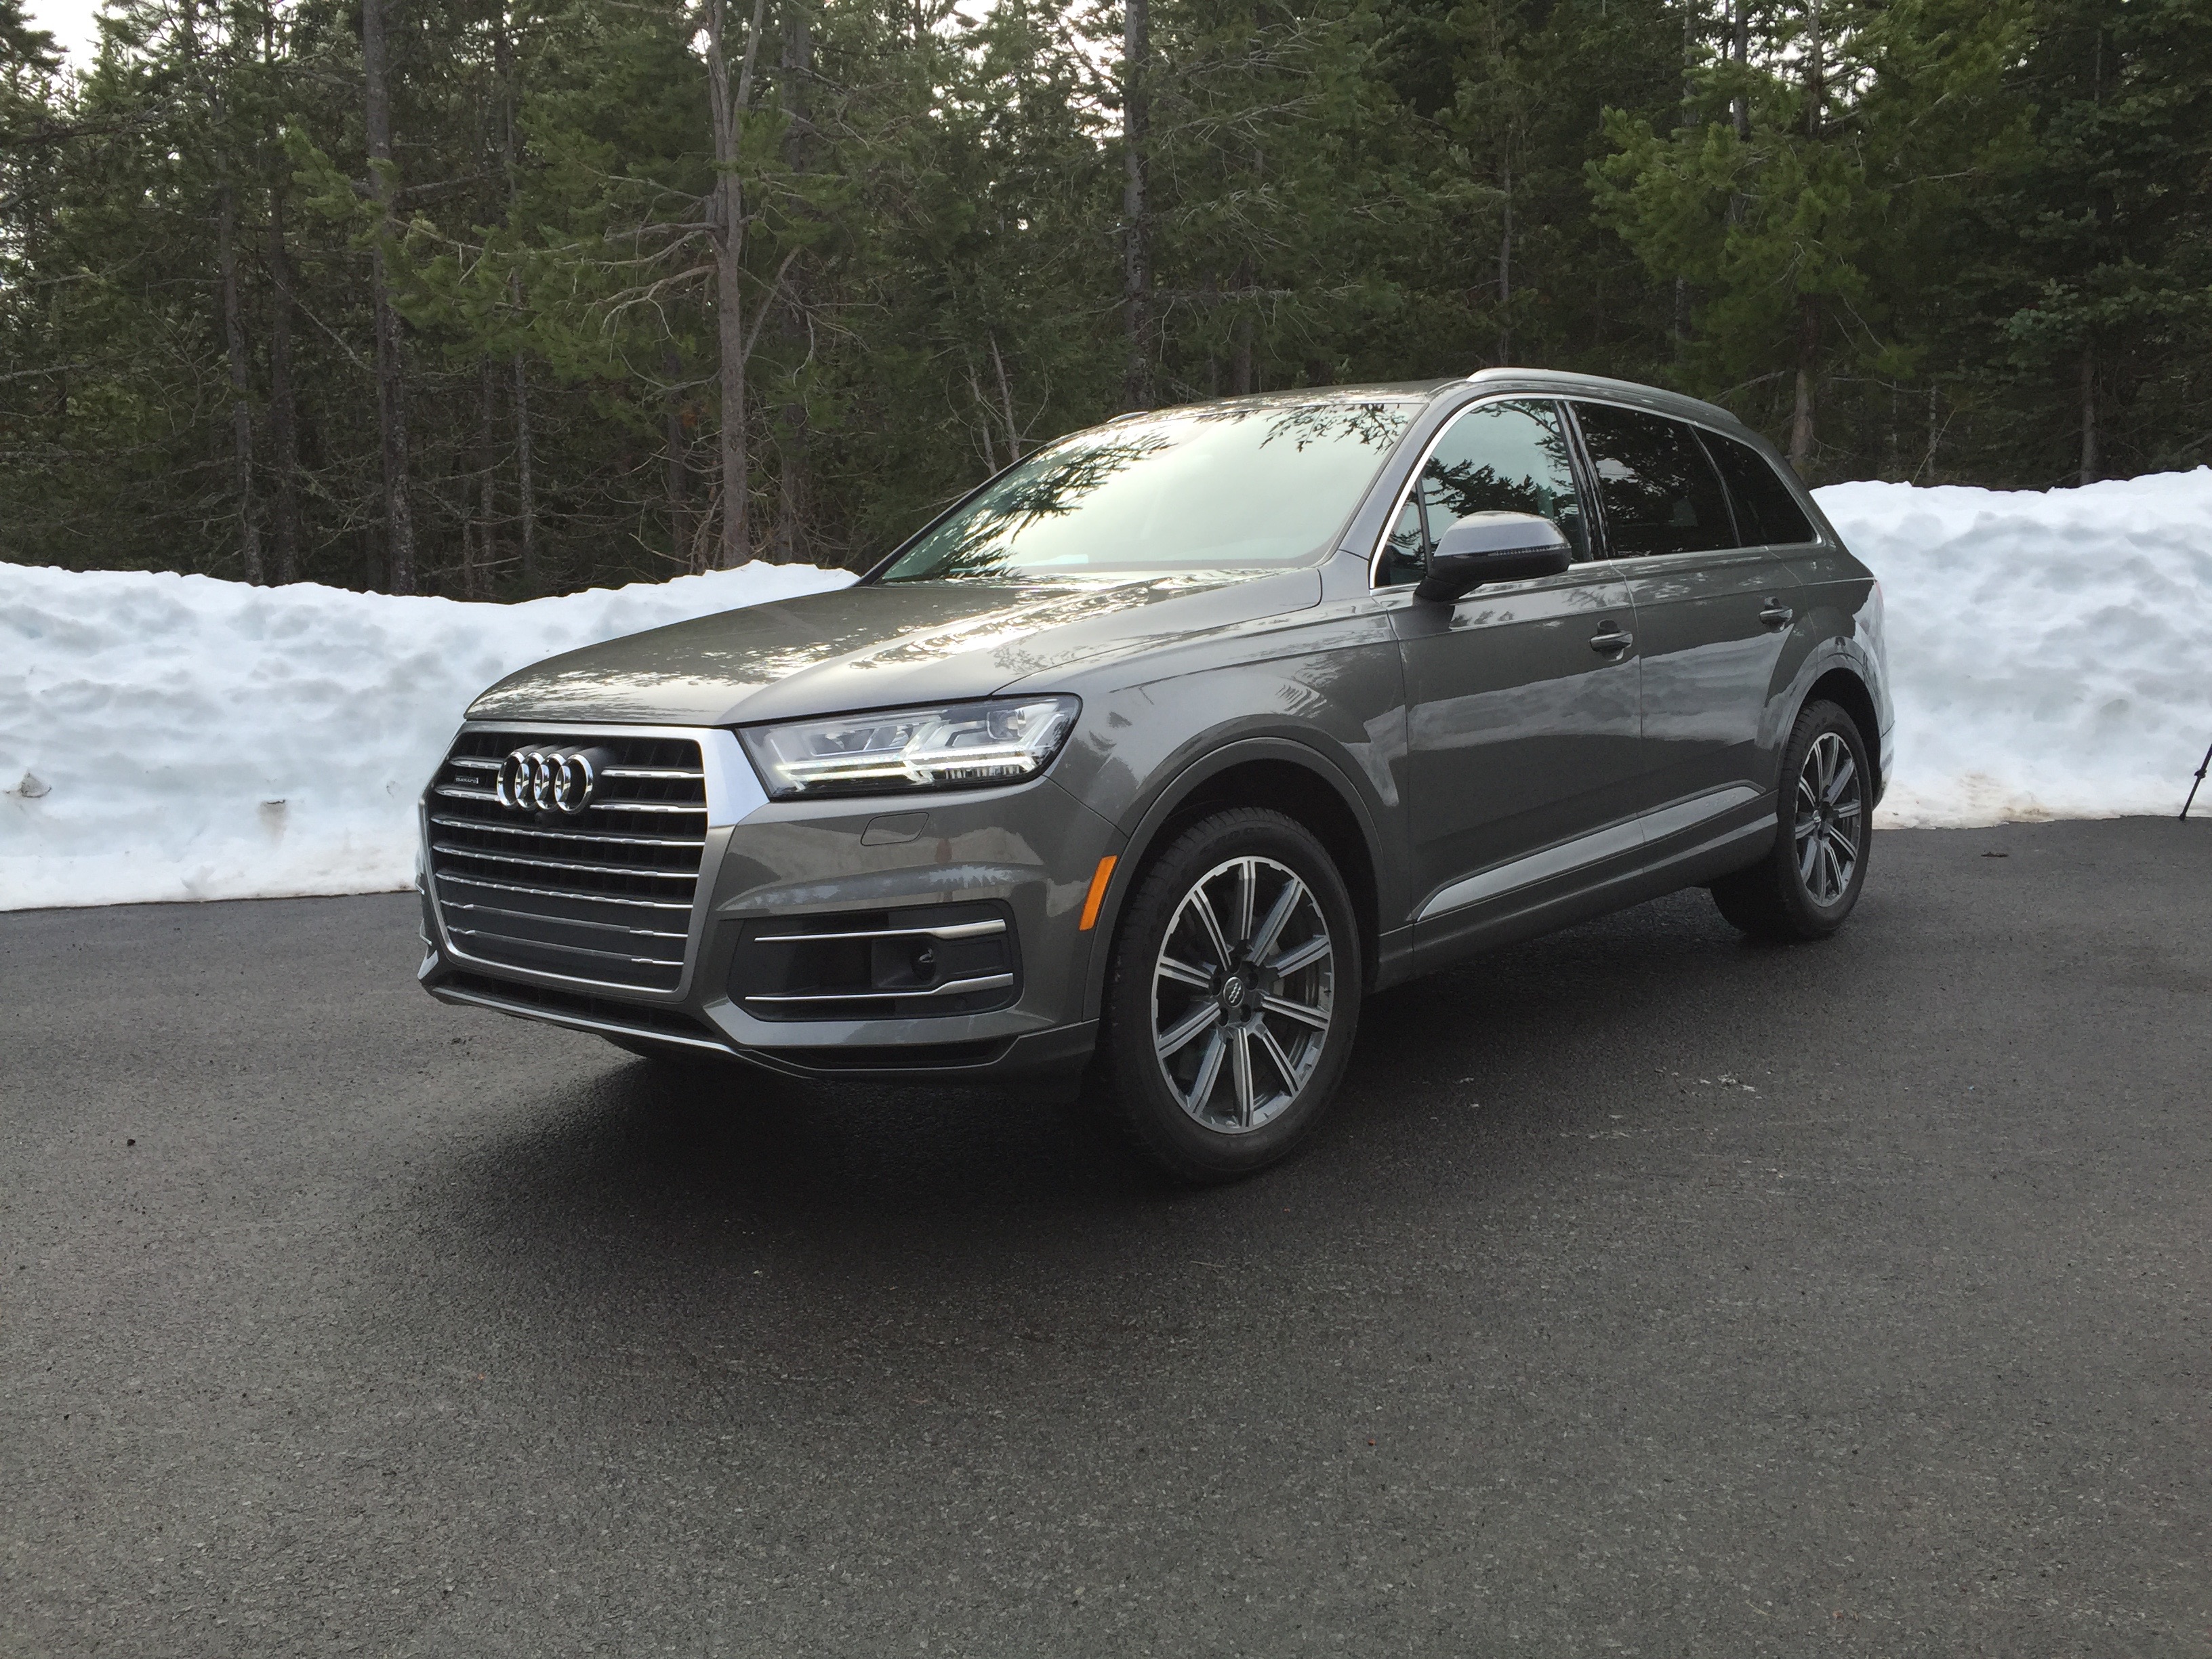 Car Review: Audi's Q7 brings power and luxury in a 3-row SUV